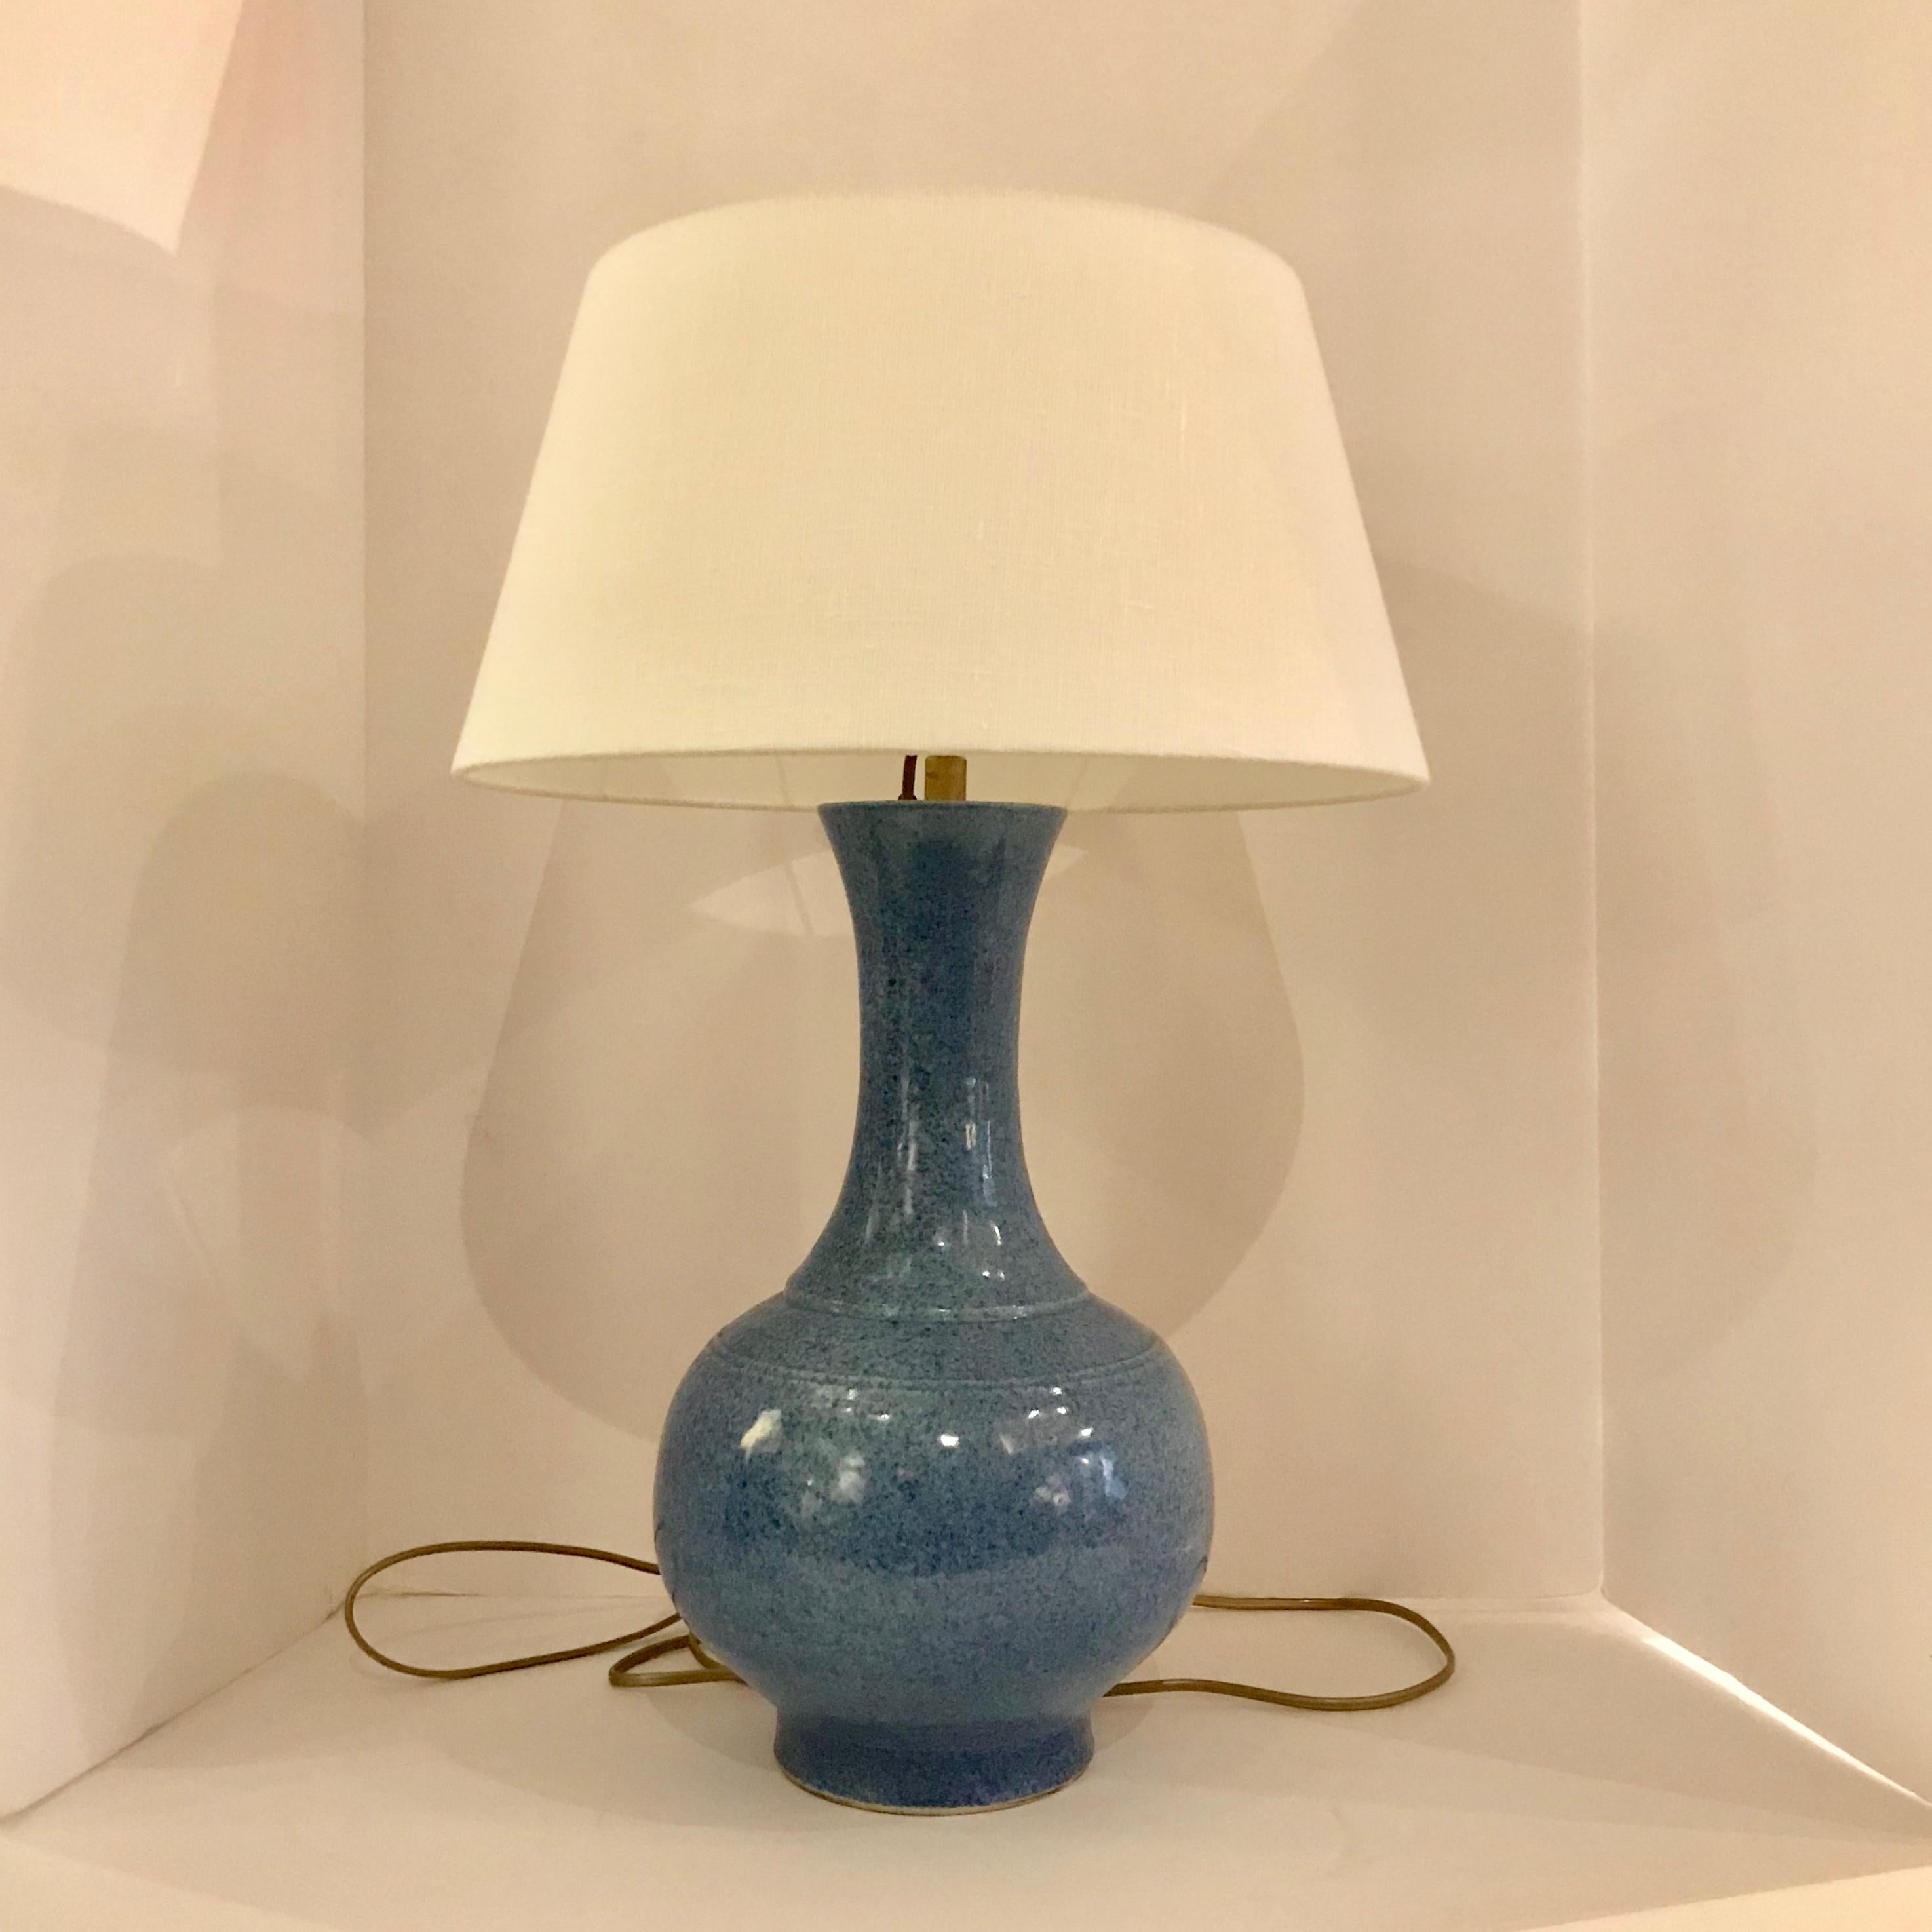 Contemporary Chinese pair mottled blue curved thin neck with round base lamps.
New Belgian linen shade.
Measures: Overall height including shade 22